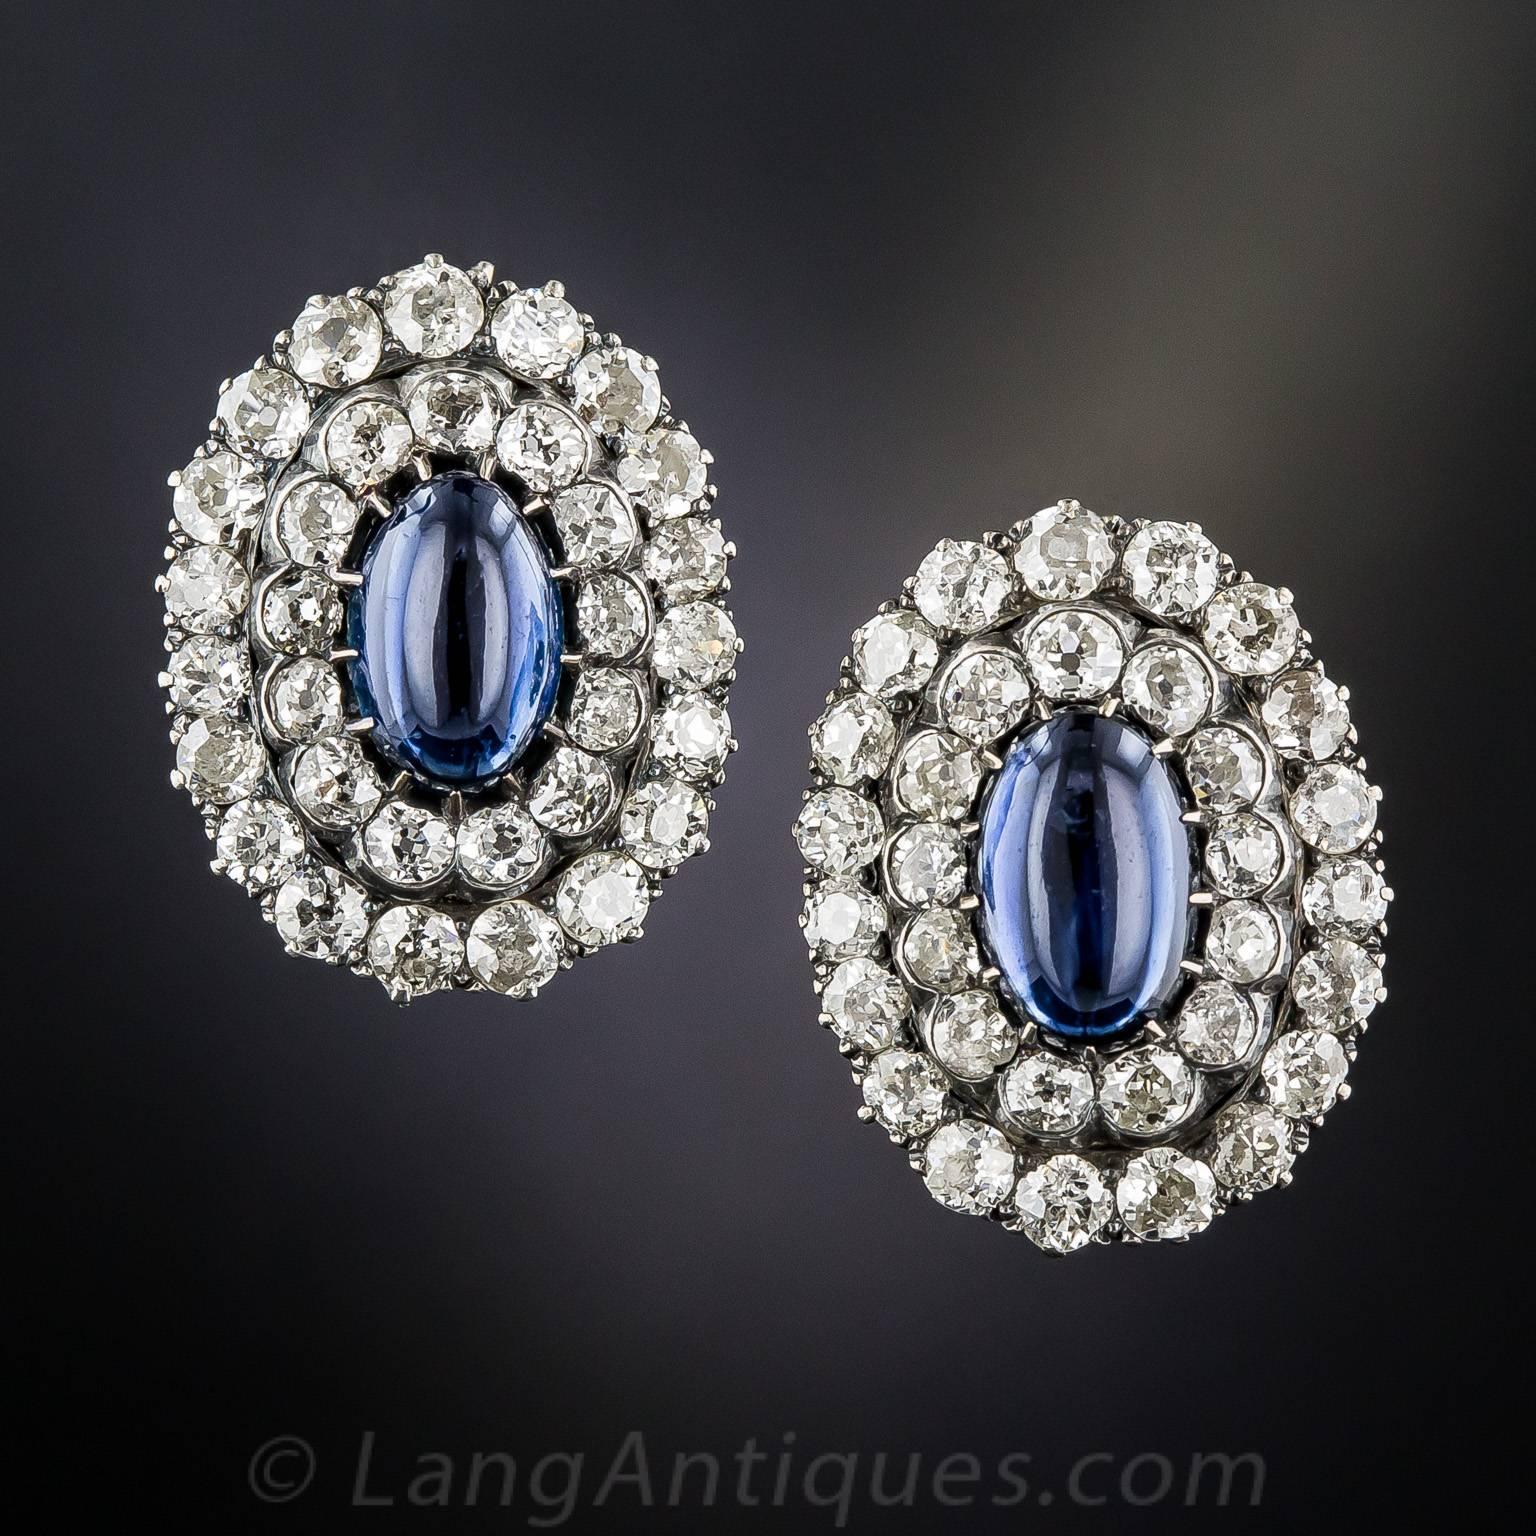 Dating from the late-19th century, these enchanting one-inch-long cabochon sapphire and diamond earclips glisten with concentric ovals of bright white diamond sparklers, totaling 6.00 carats. The elongated oval cabochon sapphire centers, together